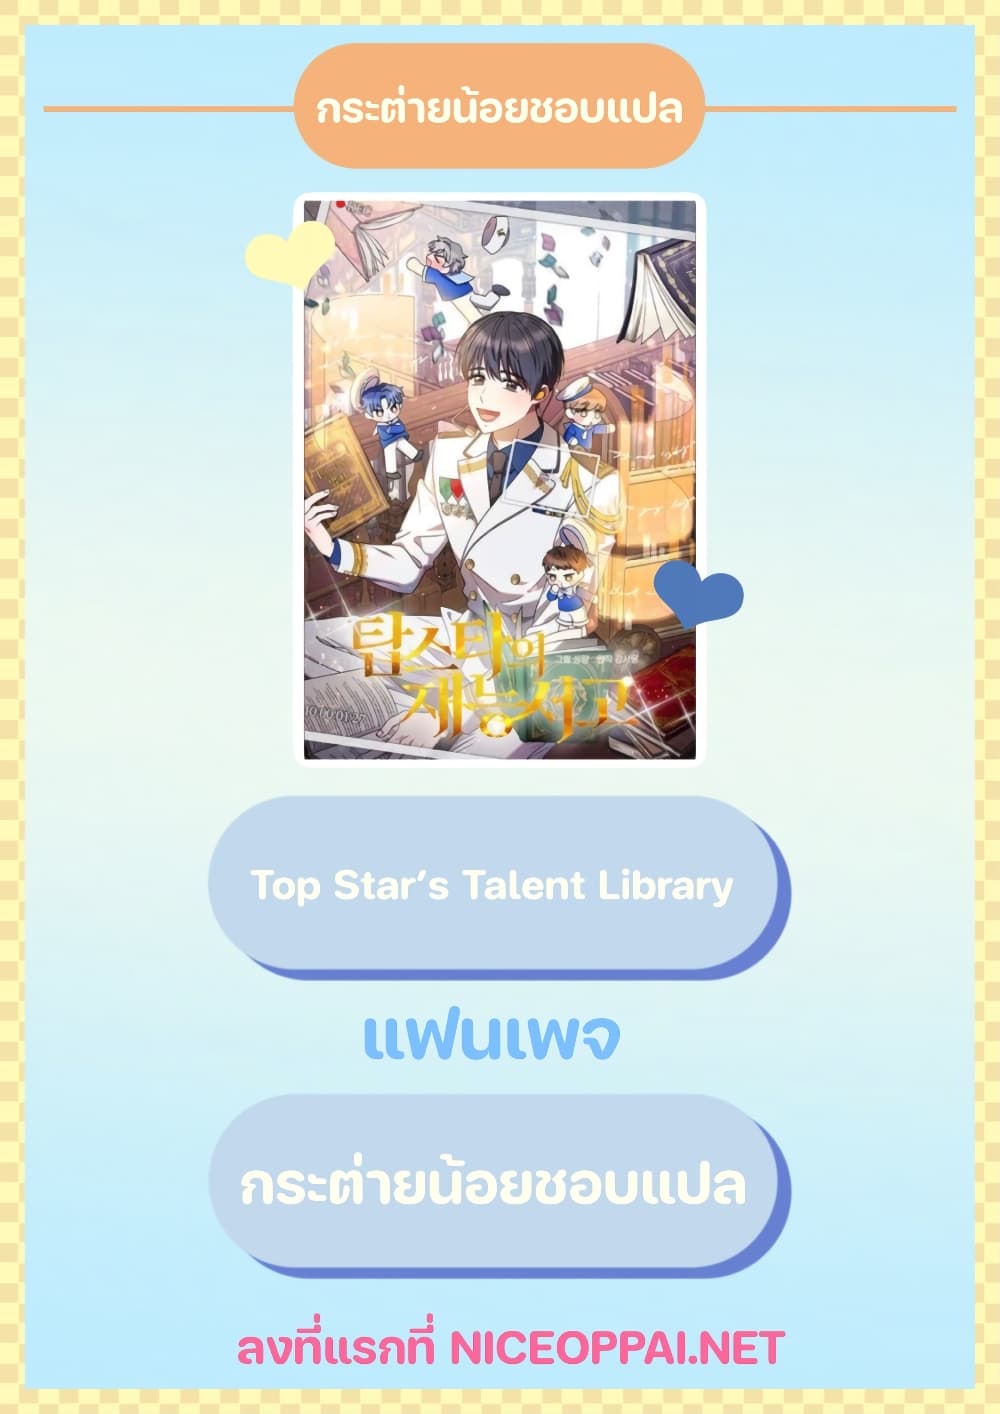 Top Star's Talent Library 5-5